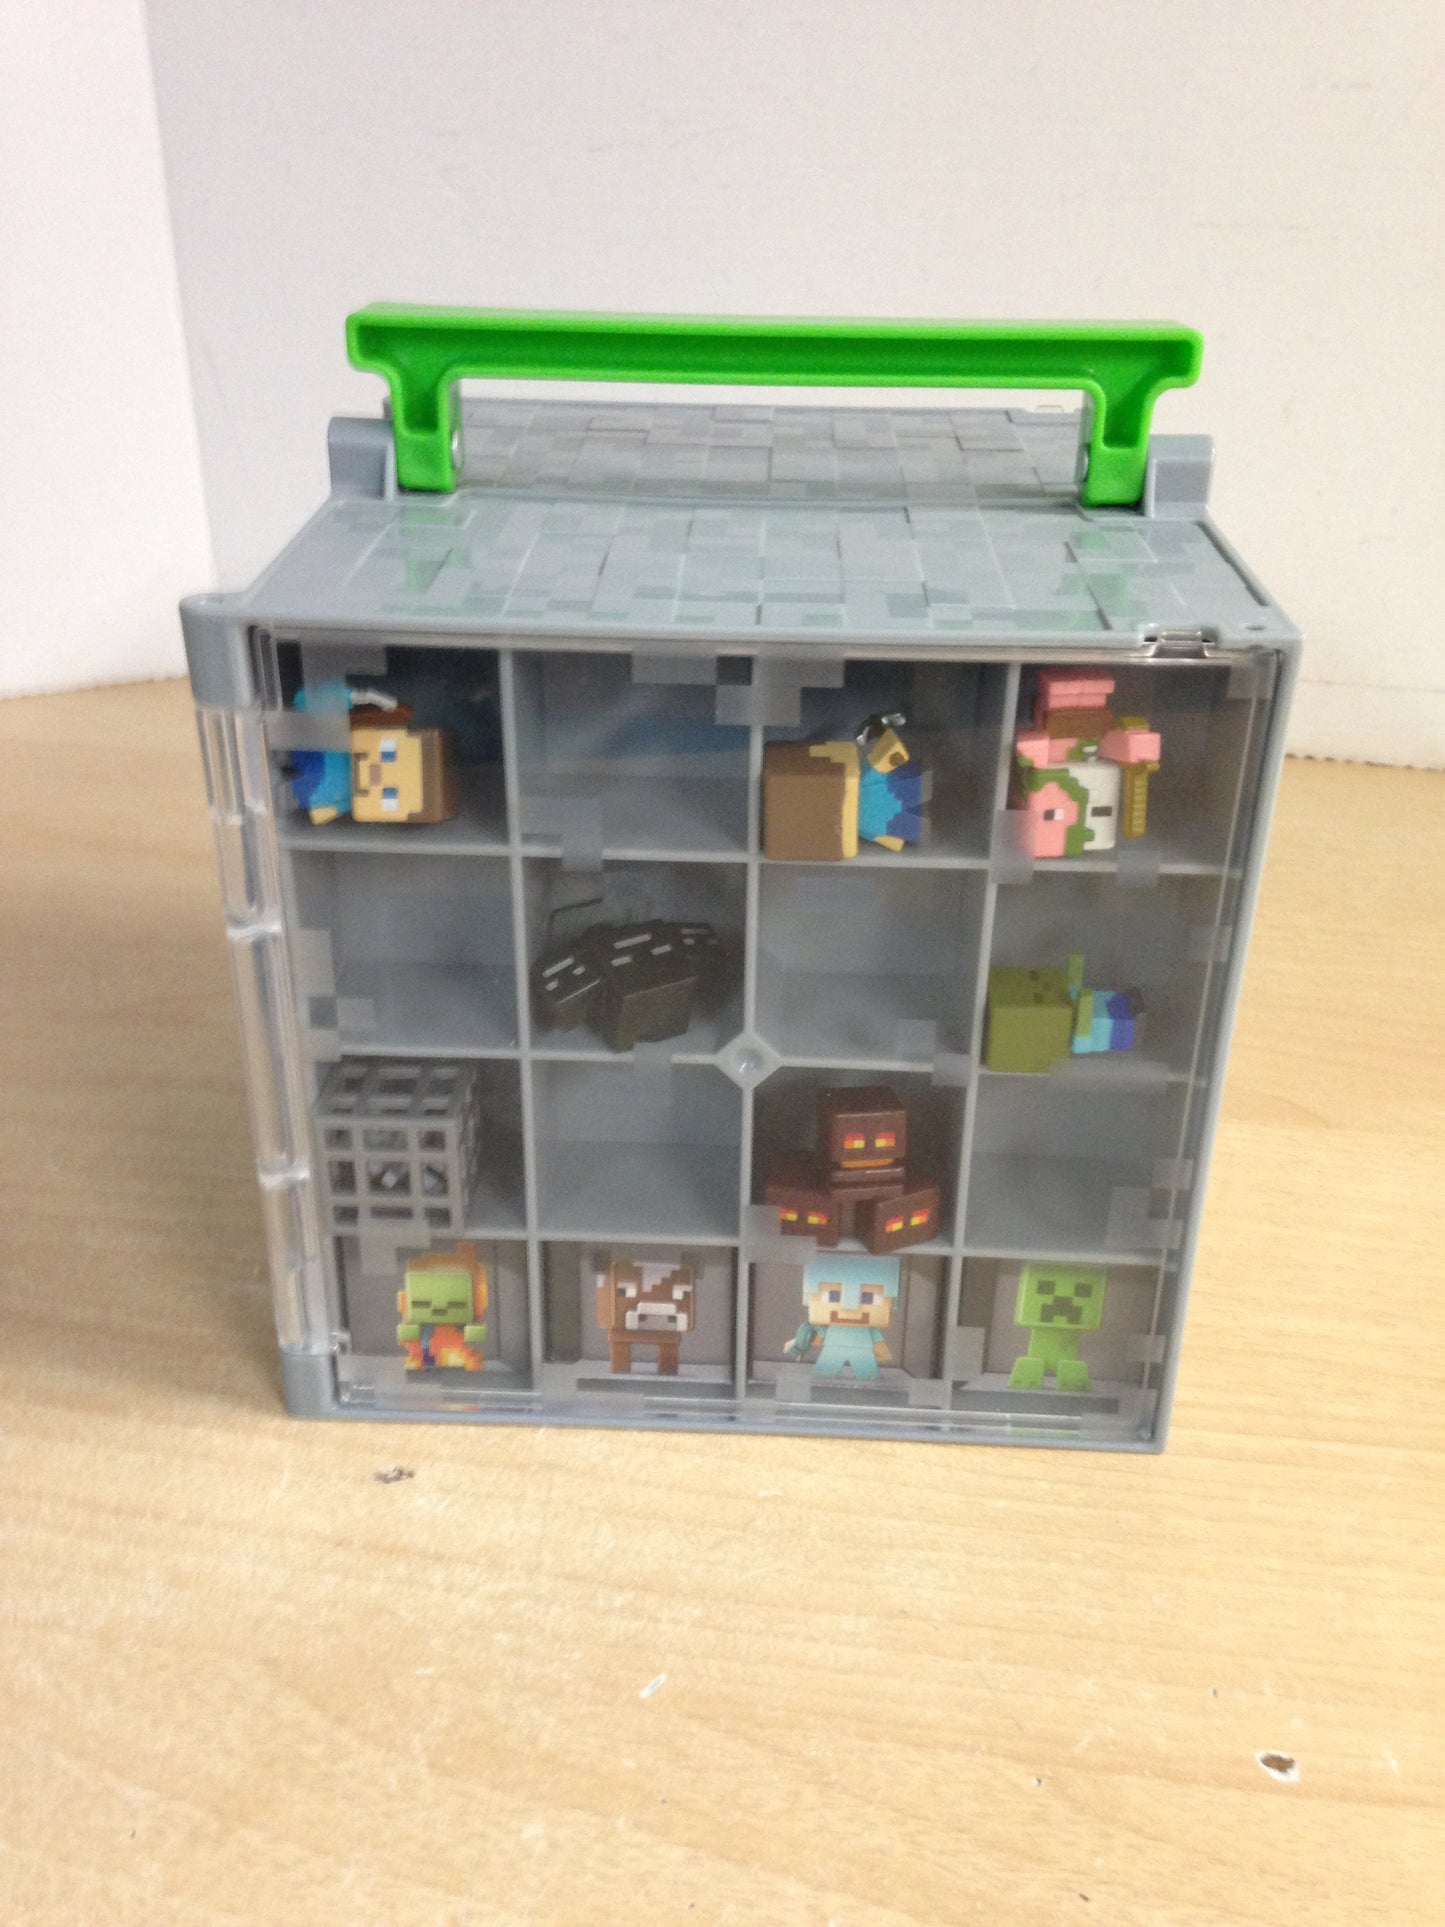 Lego Minecraft Mini Figure Collectors Case Opens For Pay Set With 17 Mini Figures Excellent